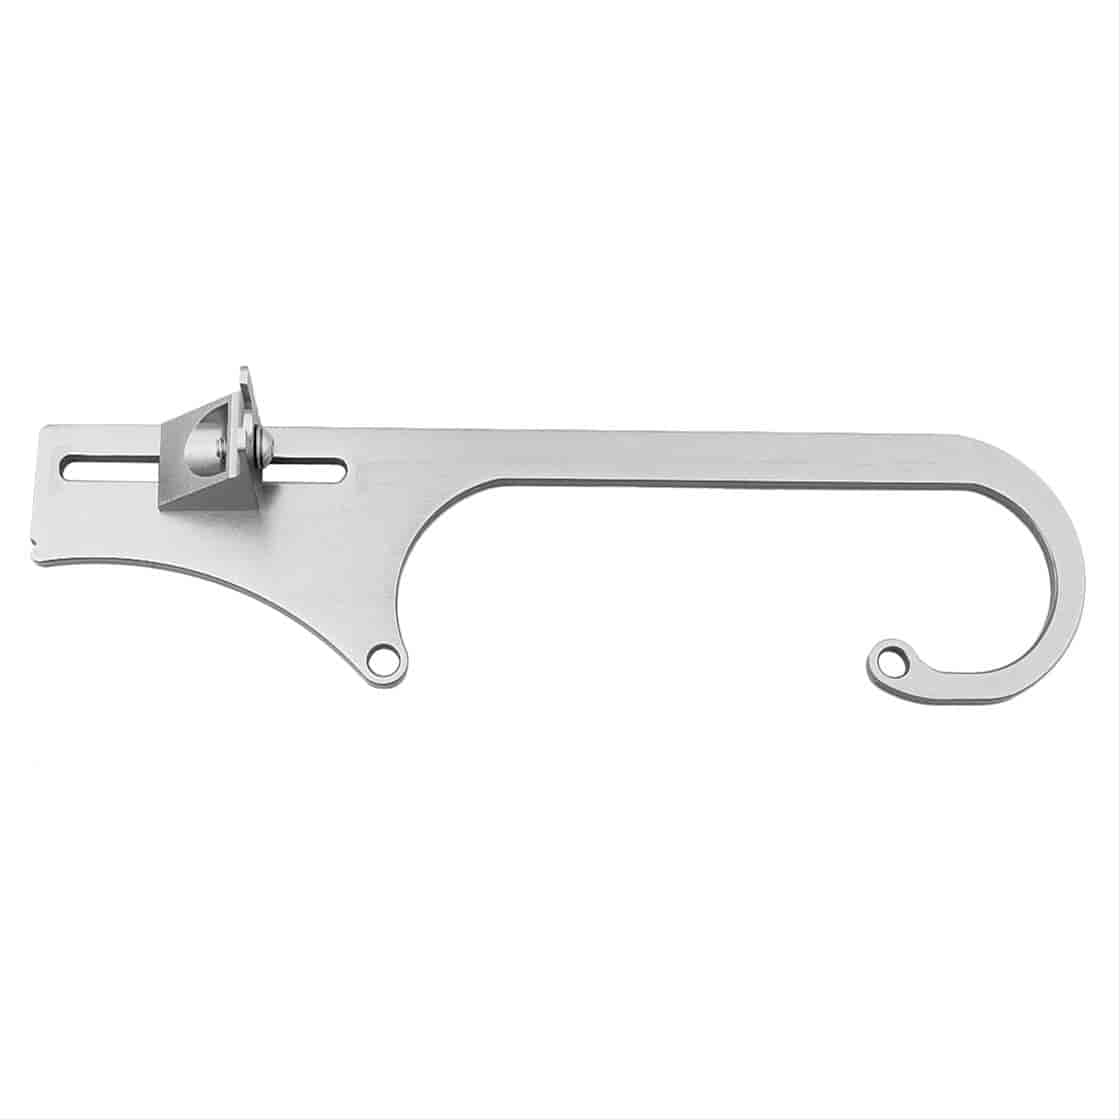 Adjustable Throttle Cable Bracket - Clear Fits 4150 Series Holley Carburetors w/ Ford Style Cable